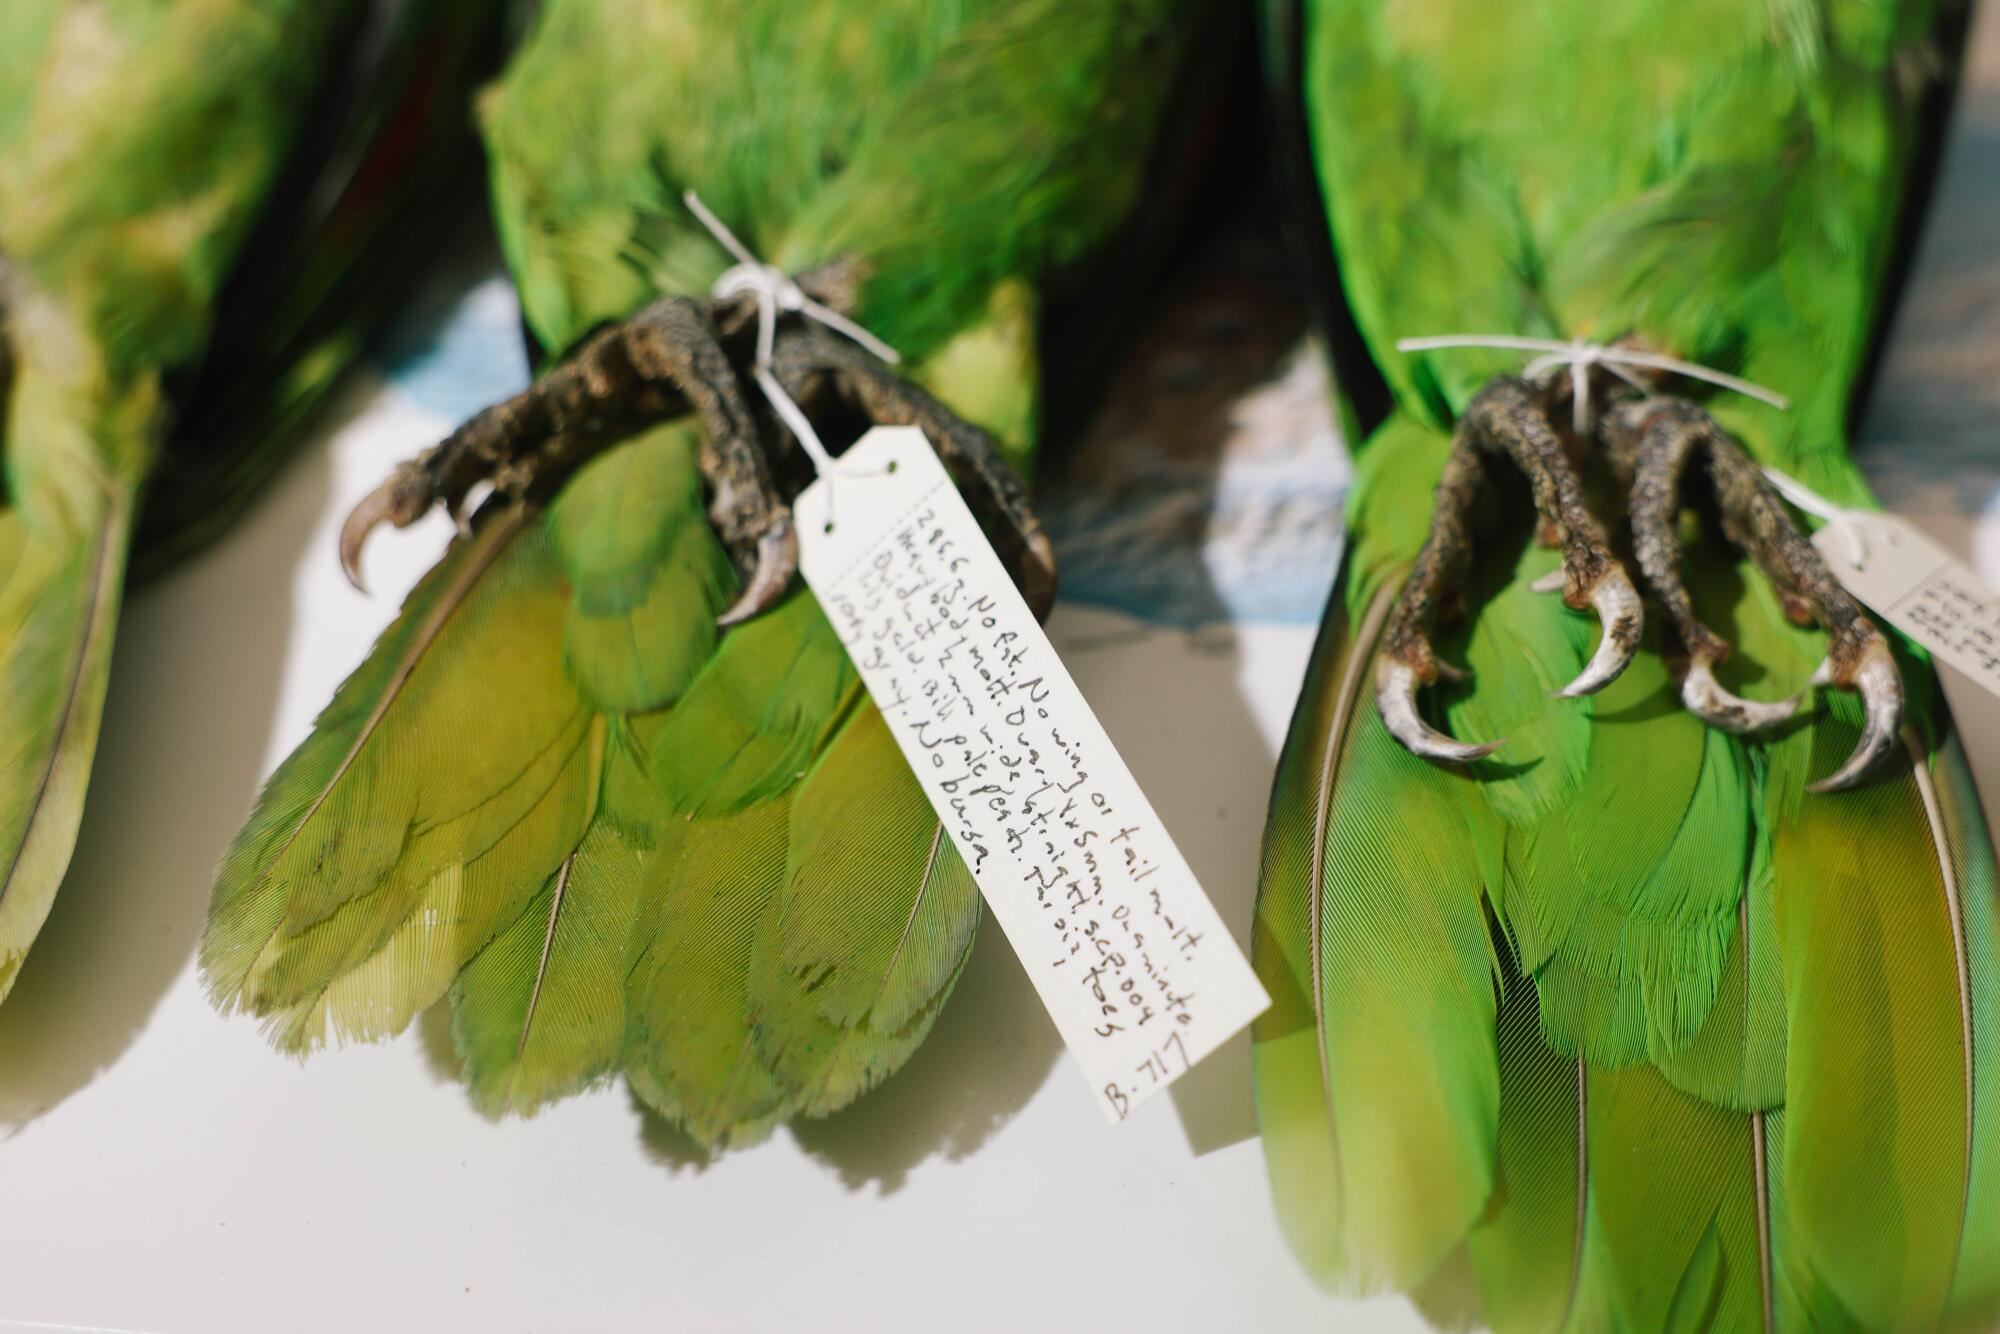 A rope ties the legs of a pair of parrot specimens in a laboratory